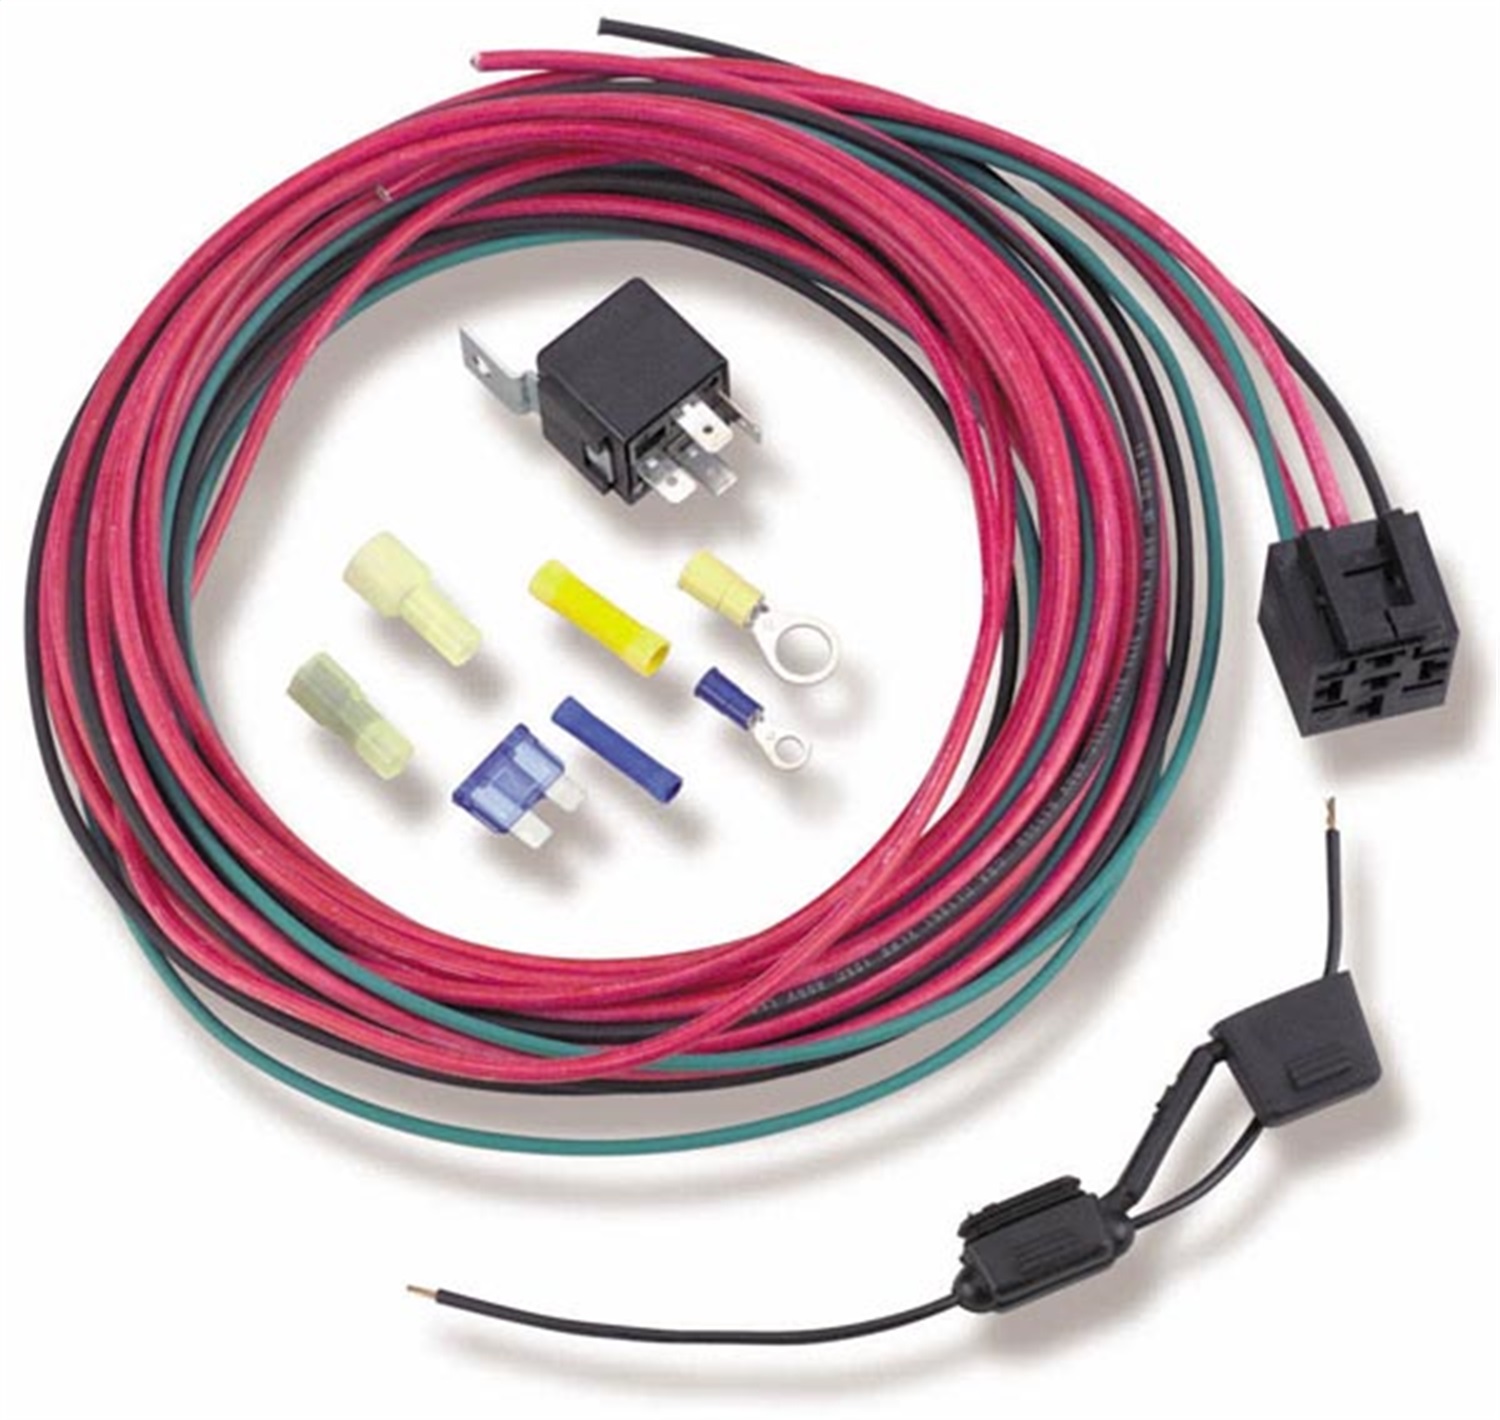 Holley Performance Holley Performance 12-753 Fuel Pump Relay Kit